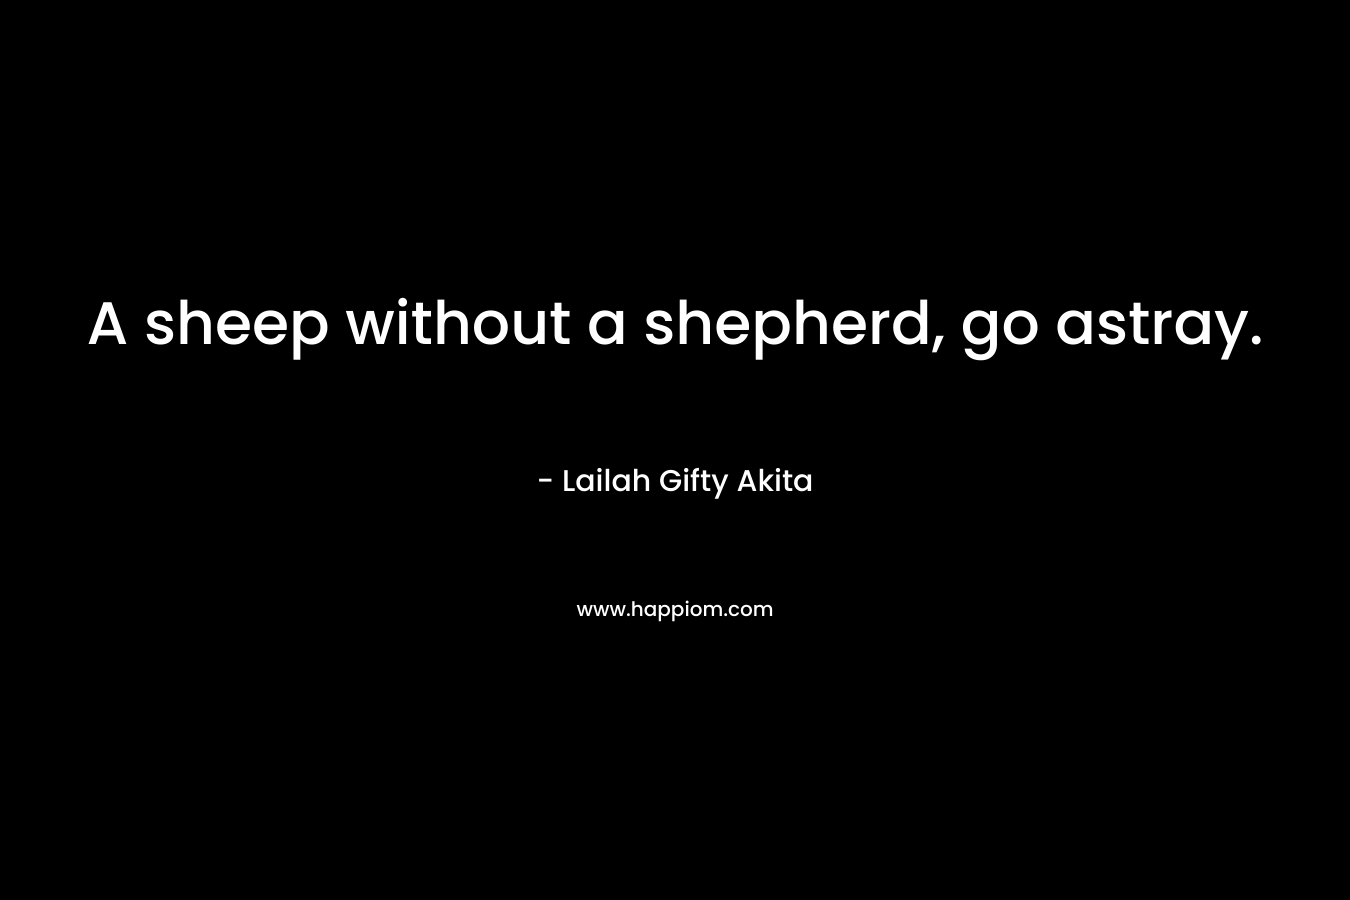 A sheep without a shepherd, go astray. – Lailah Gifty Akita